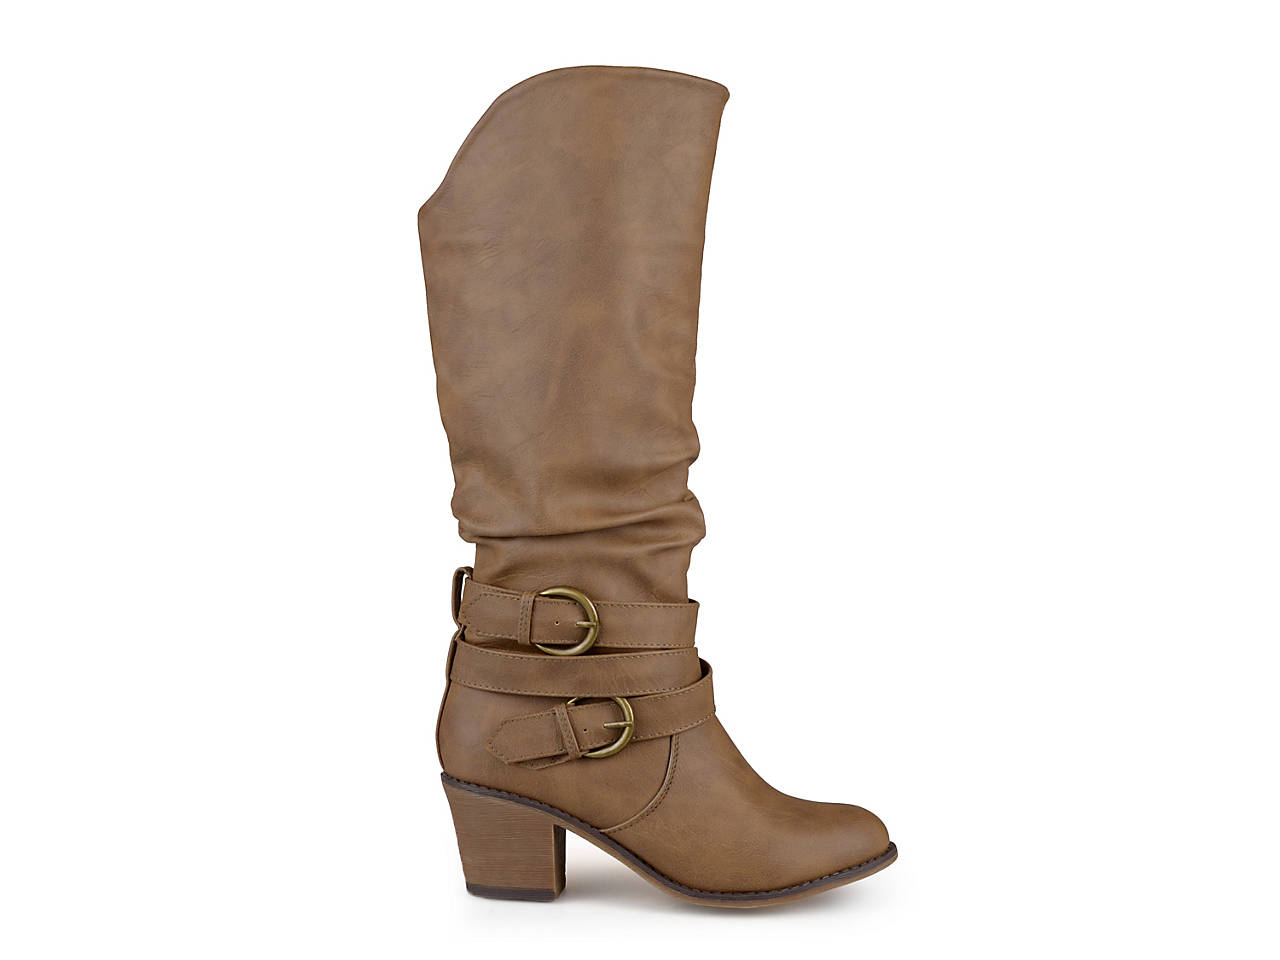 Journee Collection Late Wide Calf Boot Women's Shoes | DSW